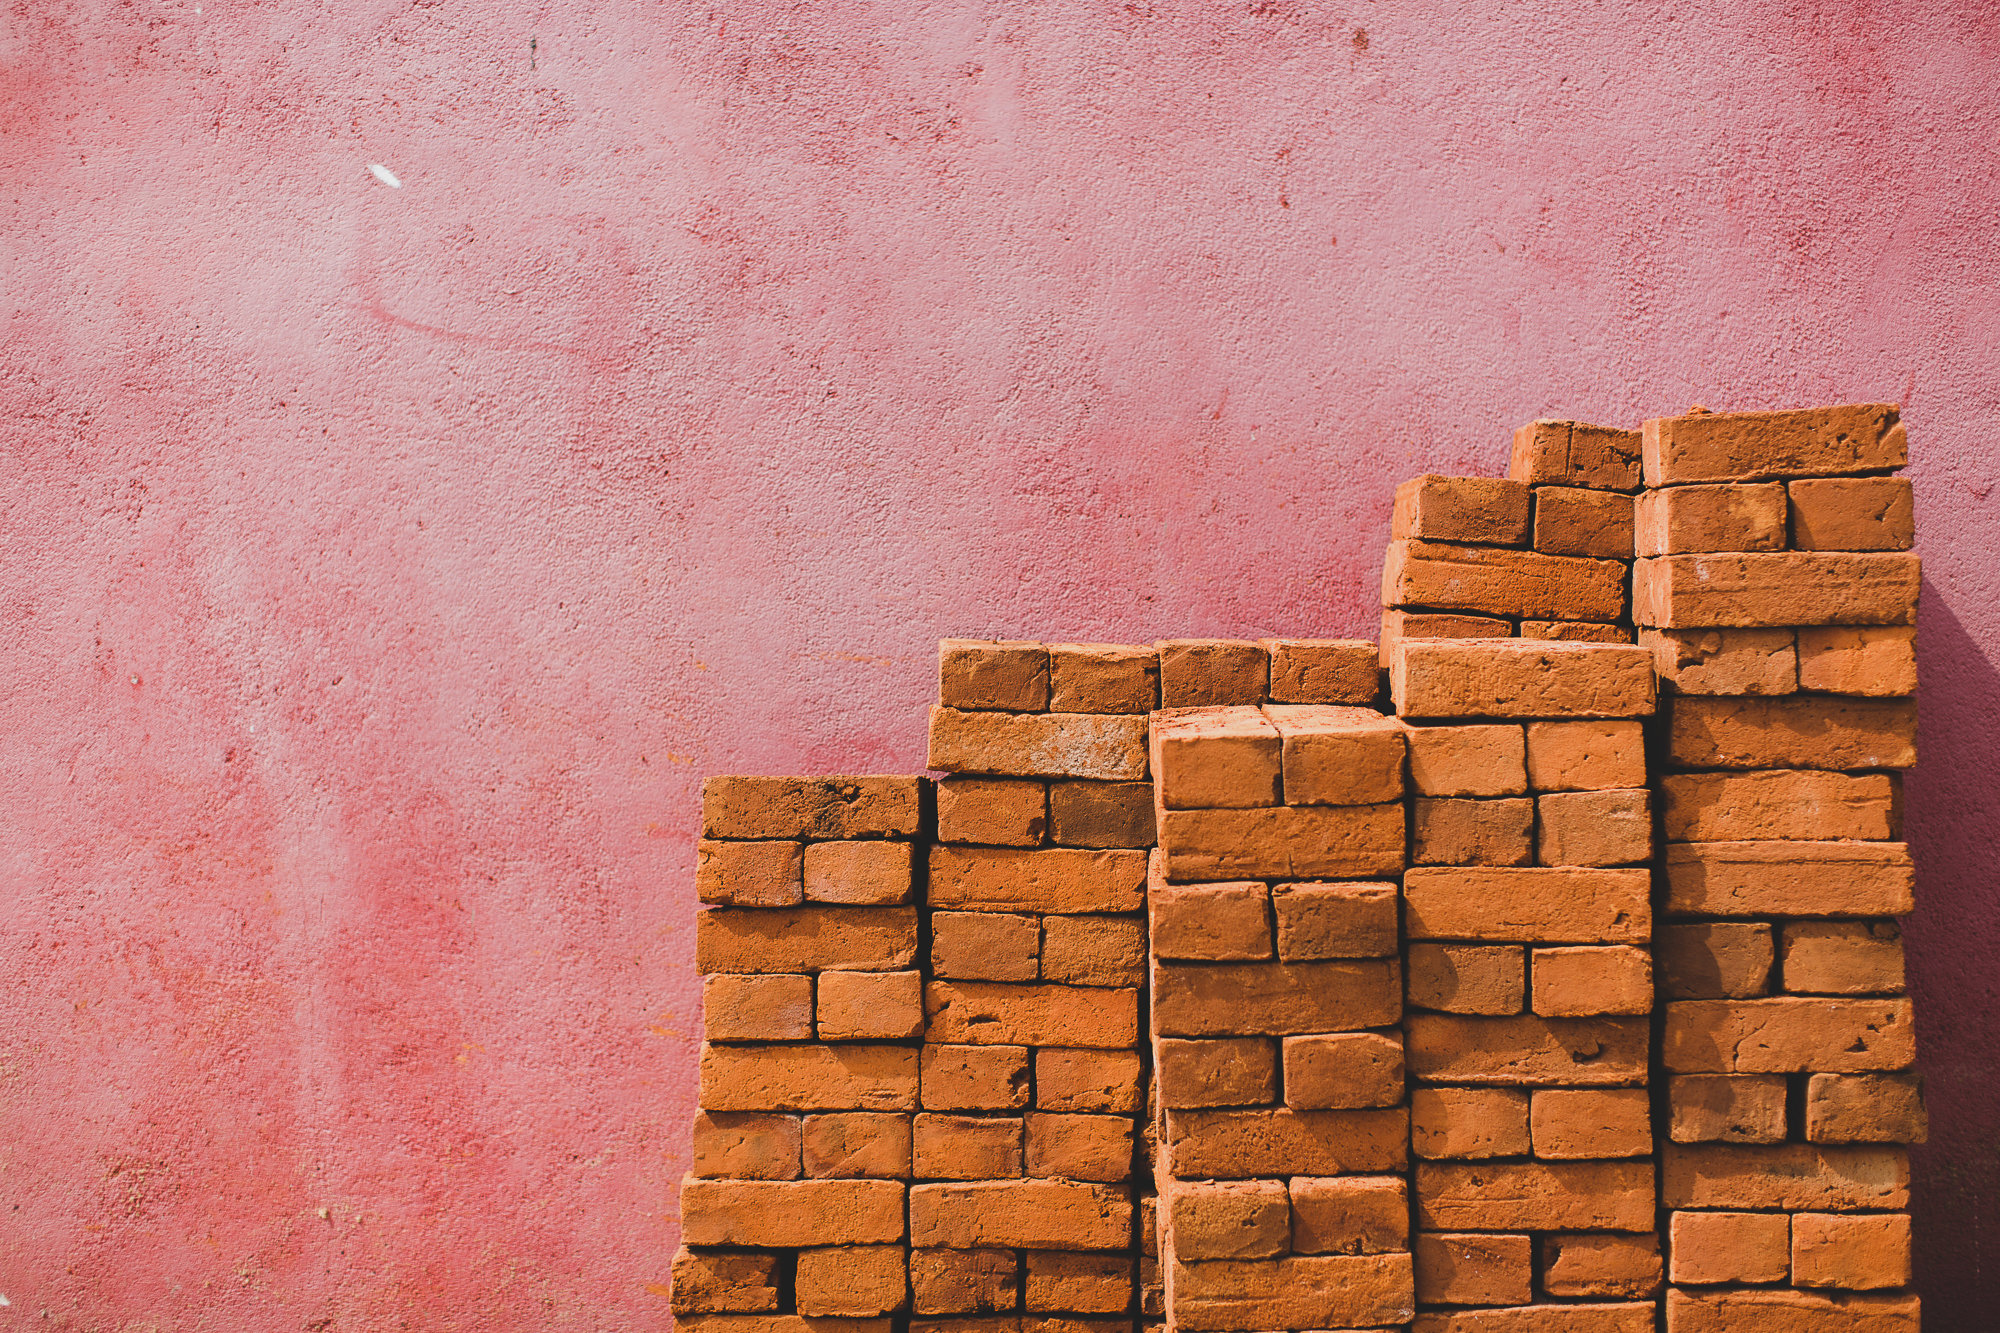 Bricks stacked against a wall